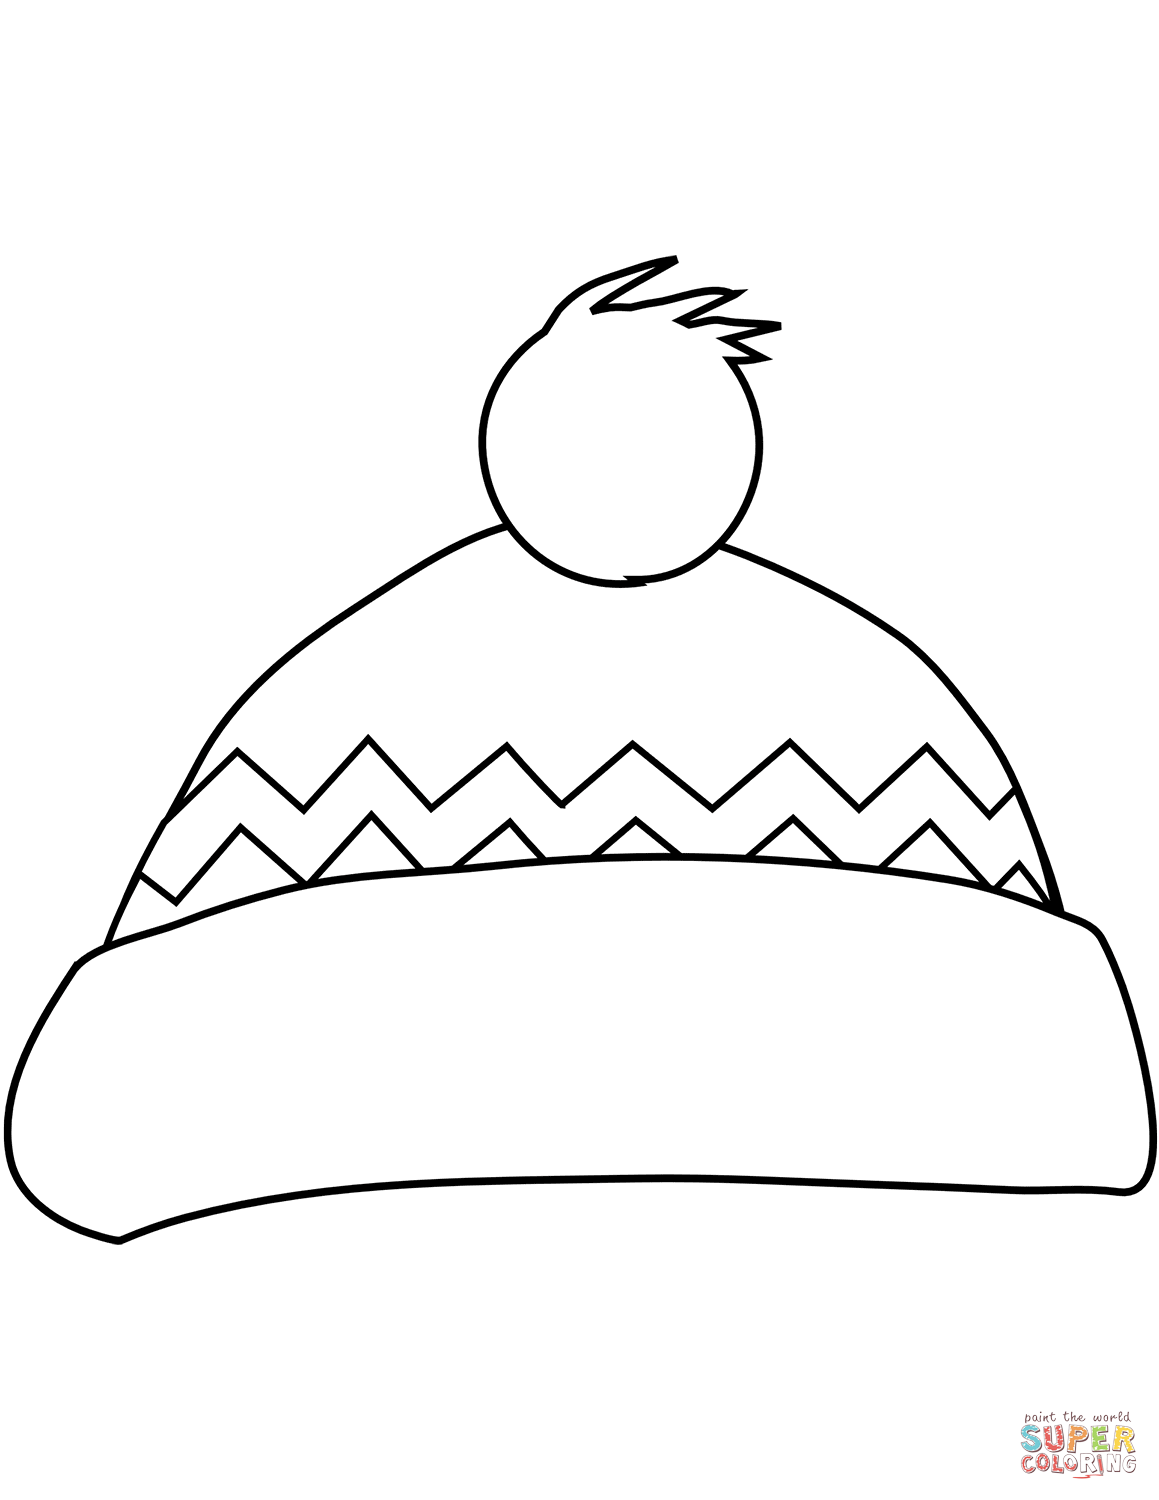 Winter bobble hat coloring page free printable coloring pages